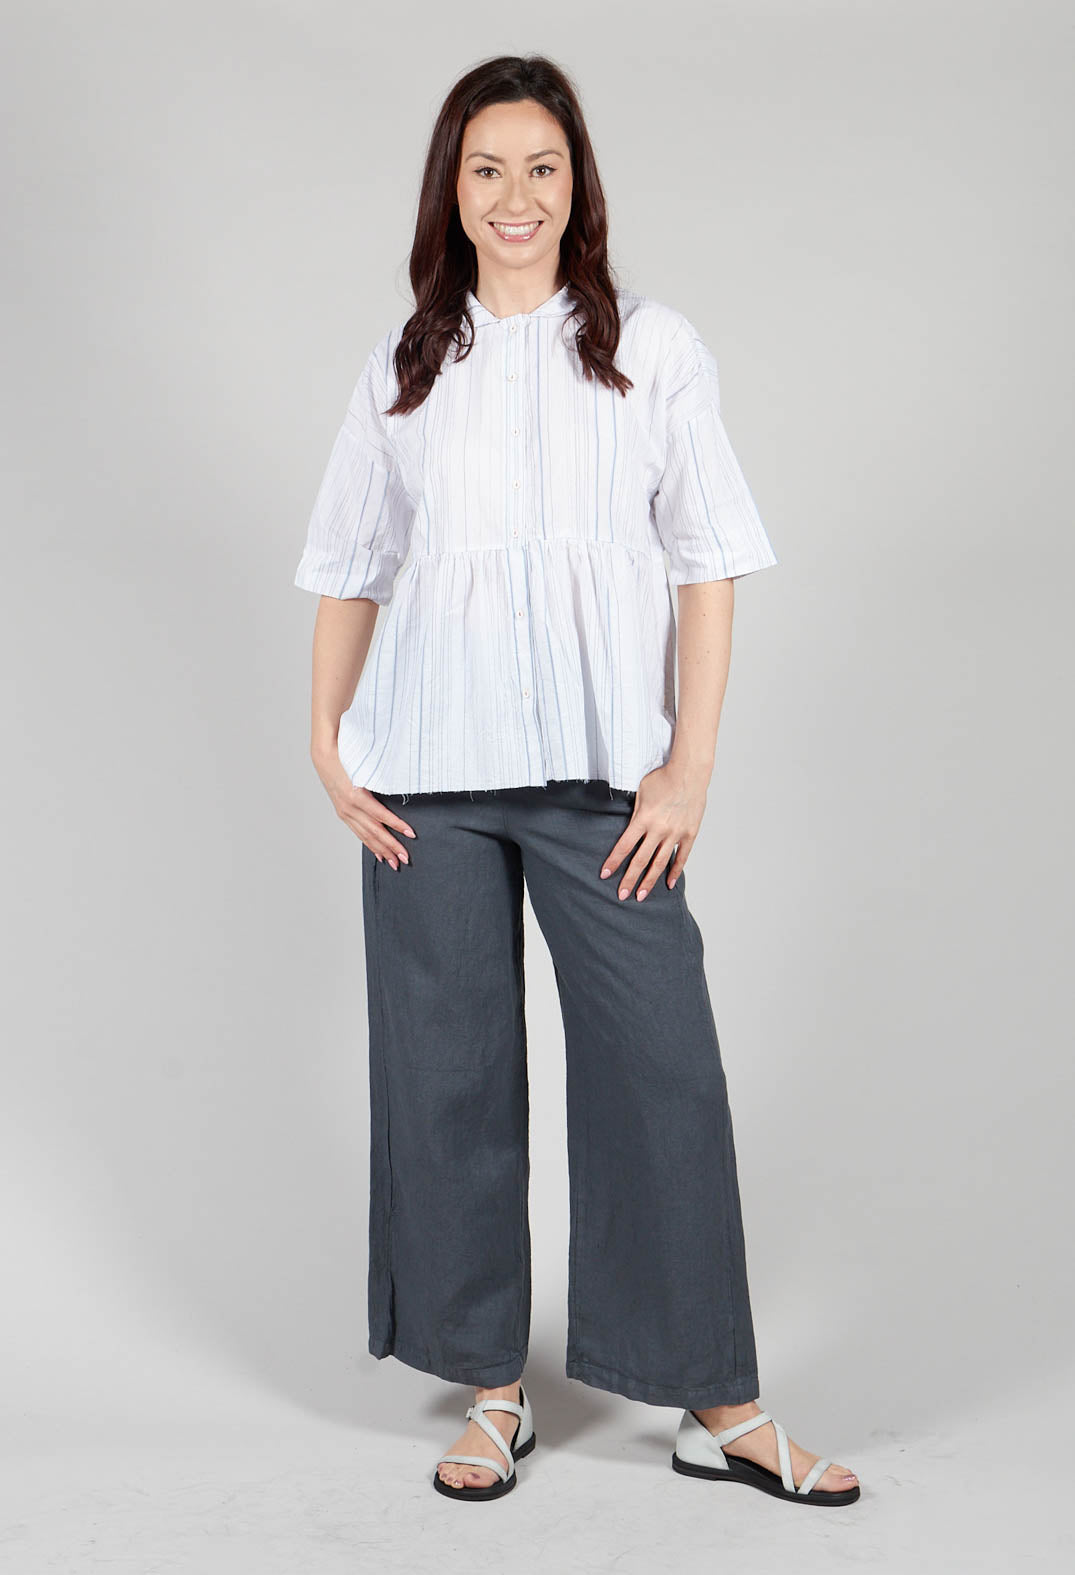 Camelie Shirt in White